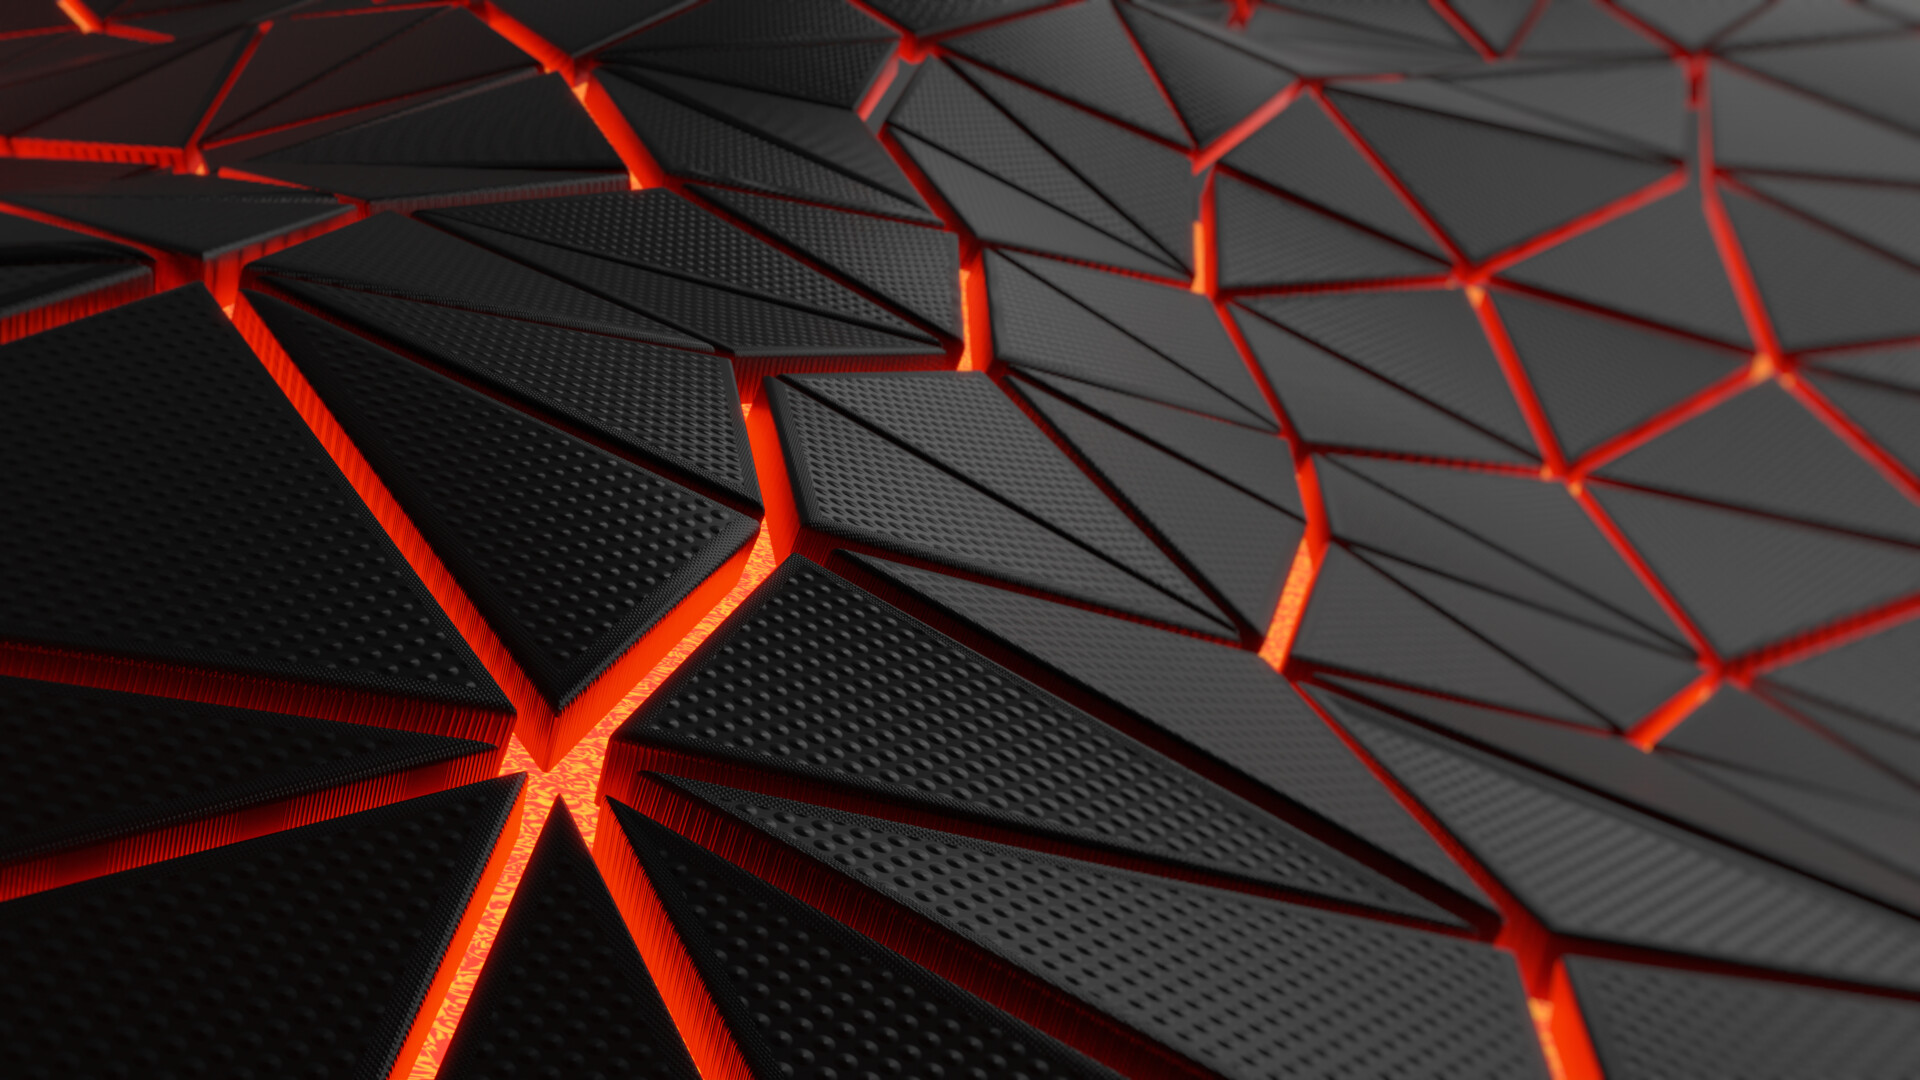 Black And Red Abstract Wallpaper 21 - [1920x1080]